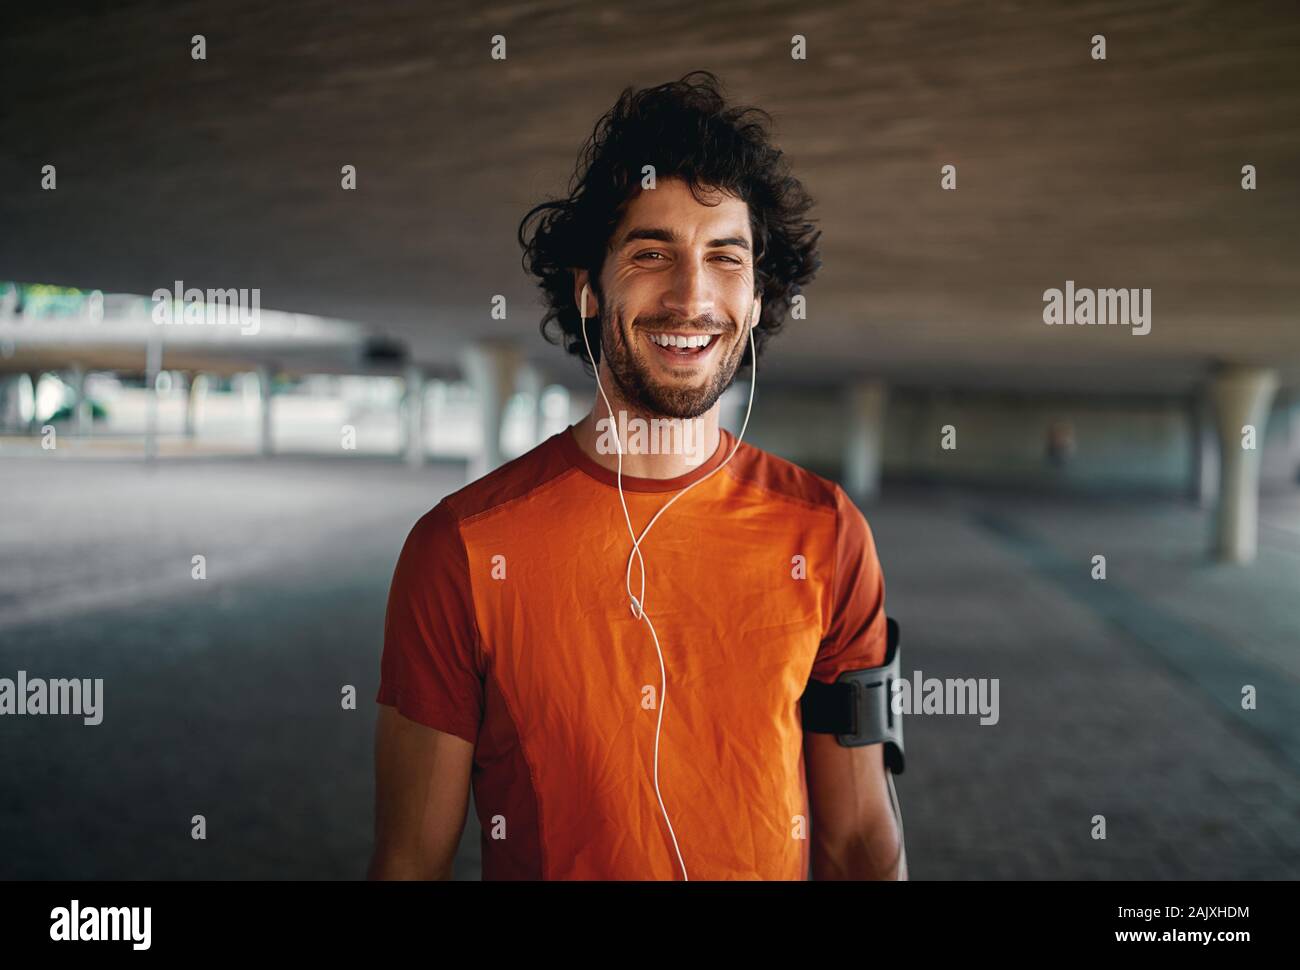 Cheerful portrait of a healthy sporty young man enjoying listening to music on earphones standing on city street Stock Photo